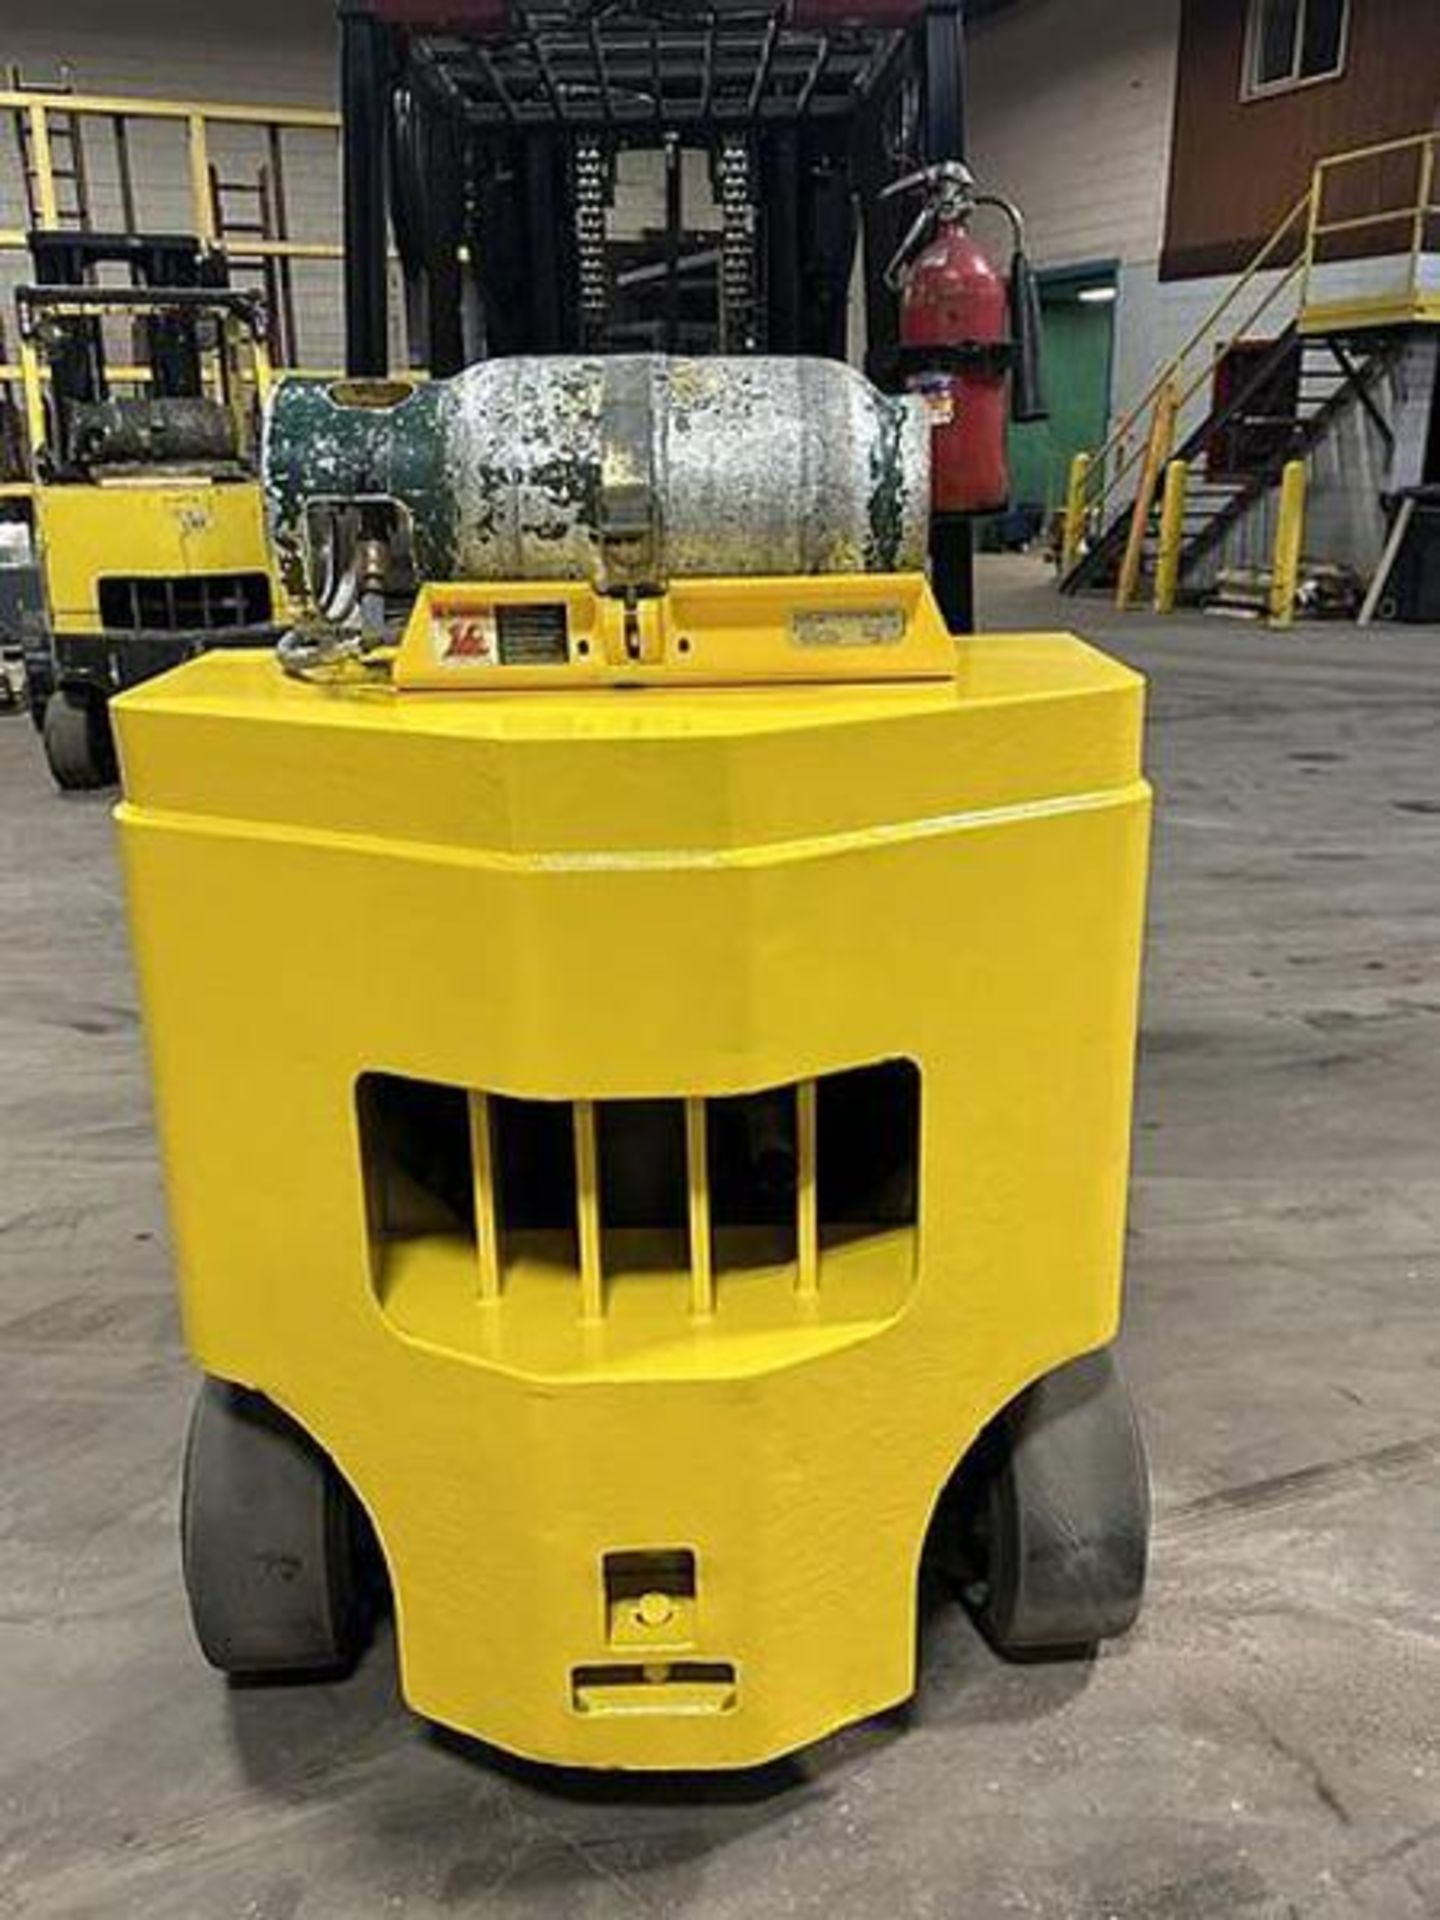 12,000 POUND HYSTER MODEL S120XL2S FORKLIFT WITH PAPER ROLL CLAMP - Image 5 of 9